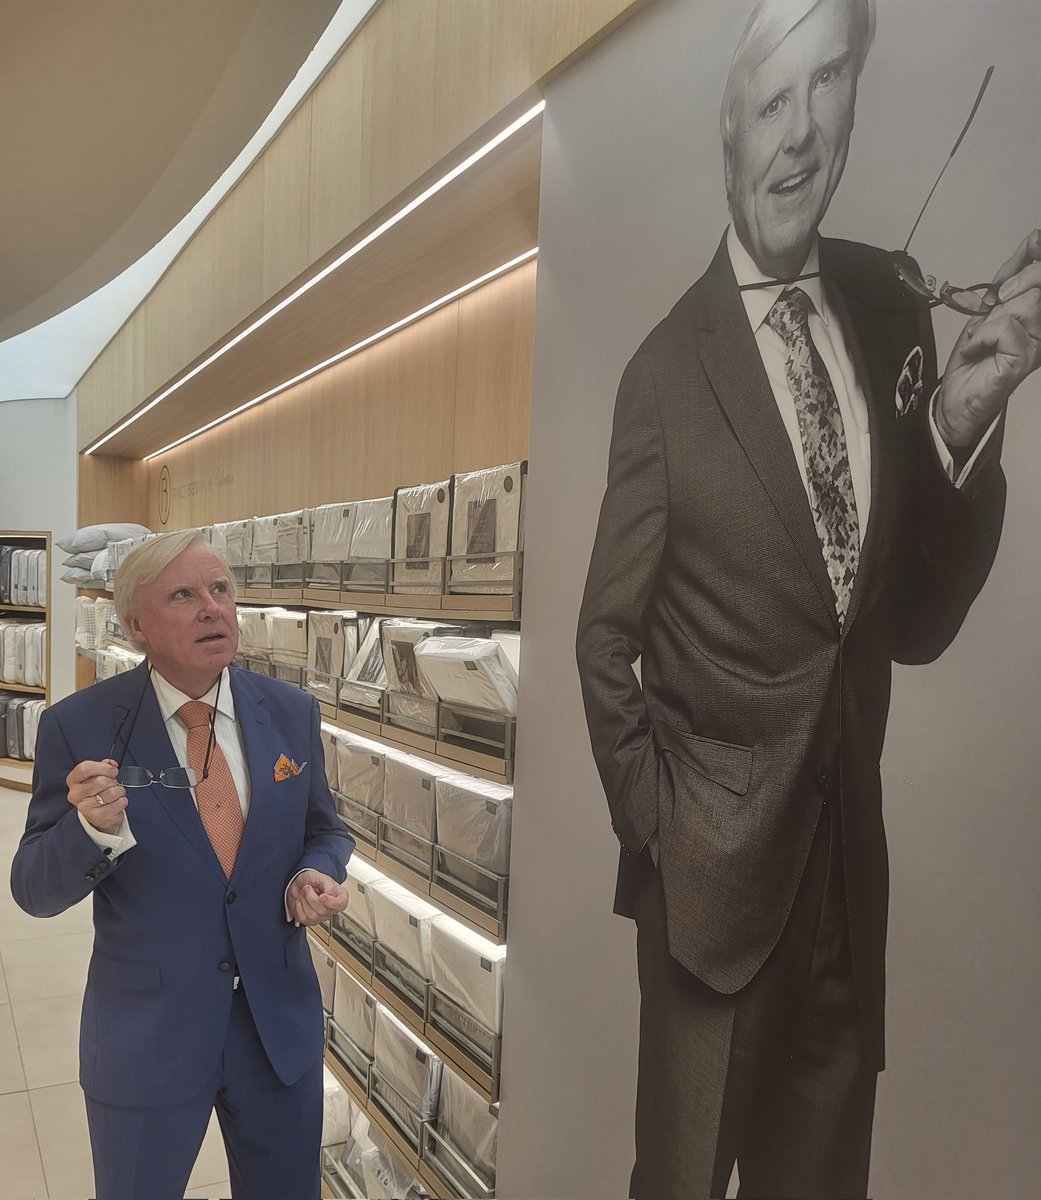 Who's yer man? Just love the new @dunnesstores in Dundrum. Every best wish to Joe, all the team & fellow designers in this stunning new store.